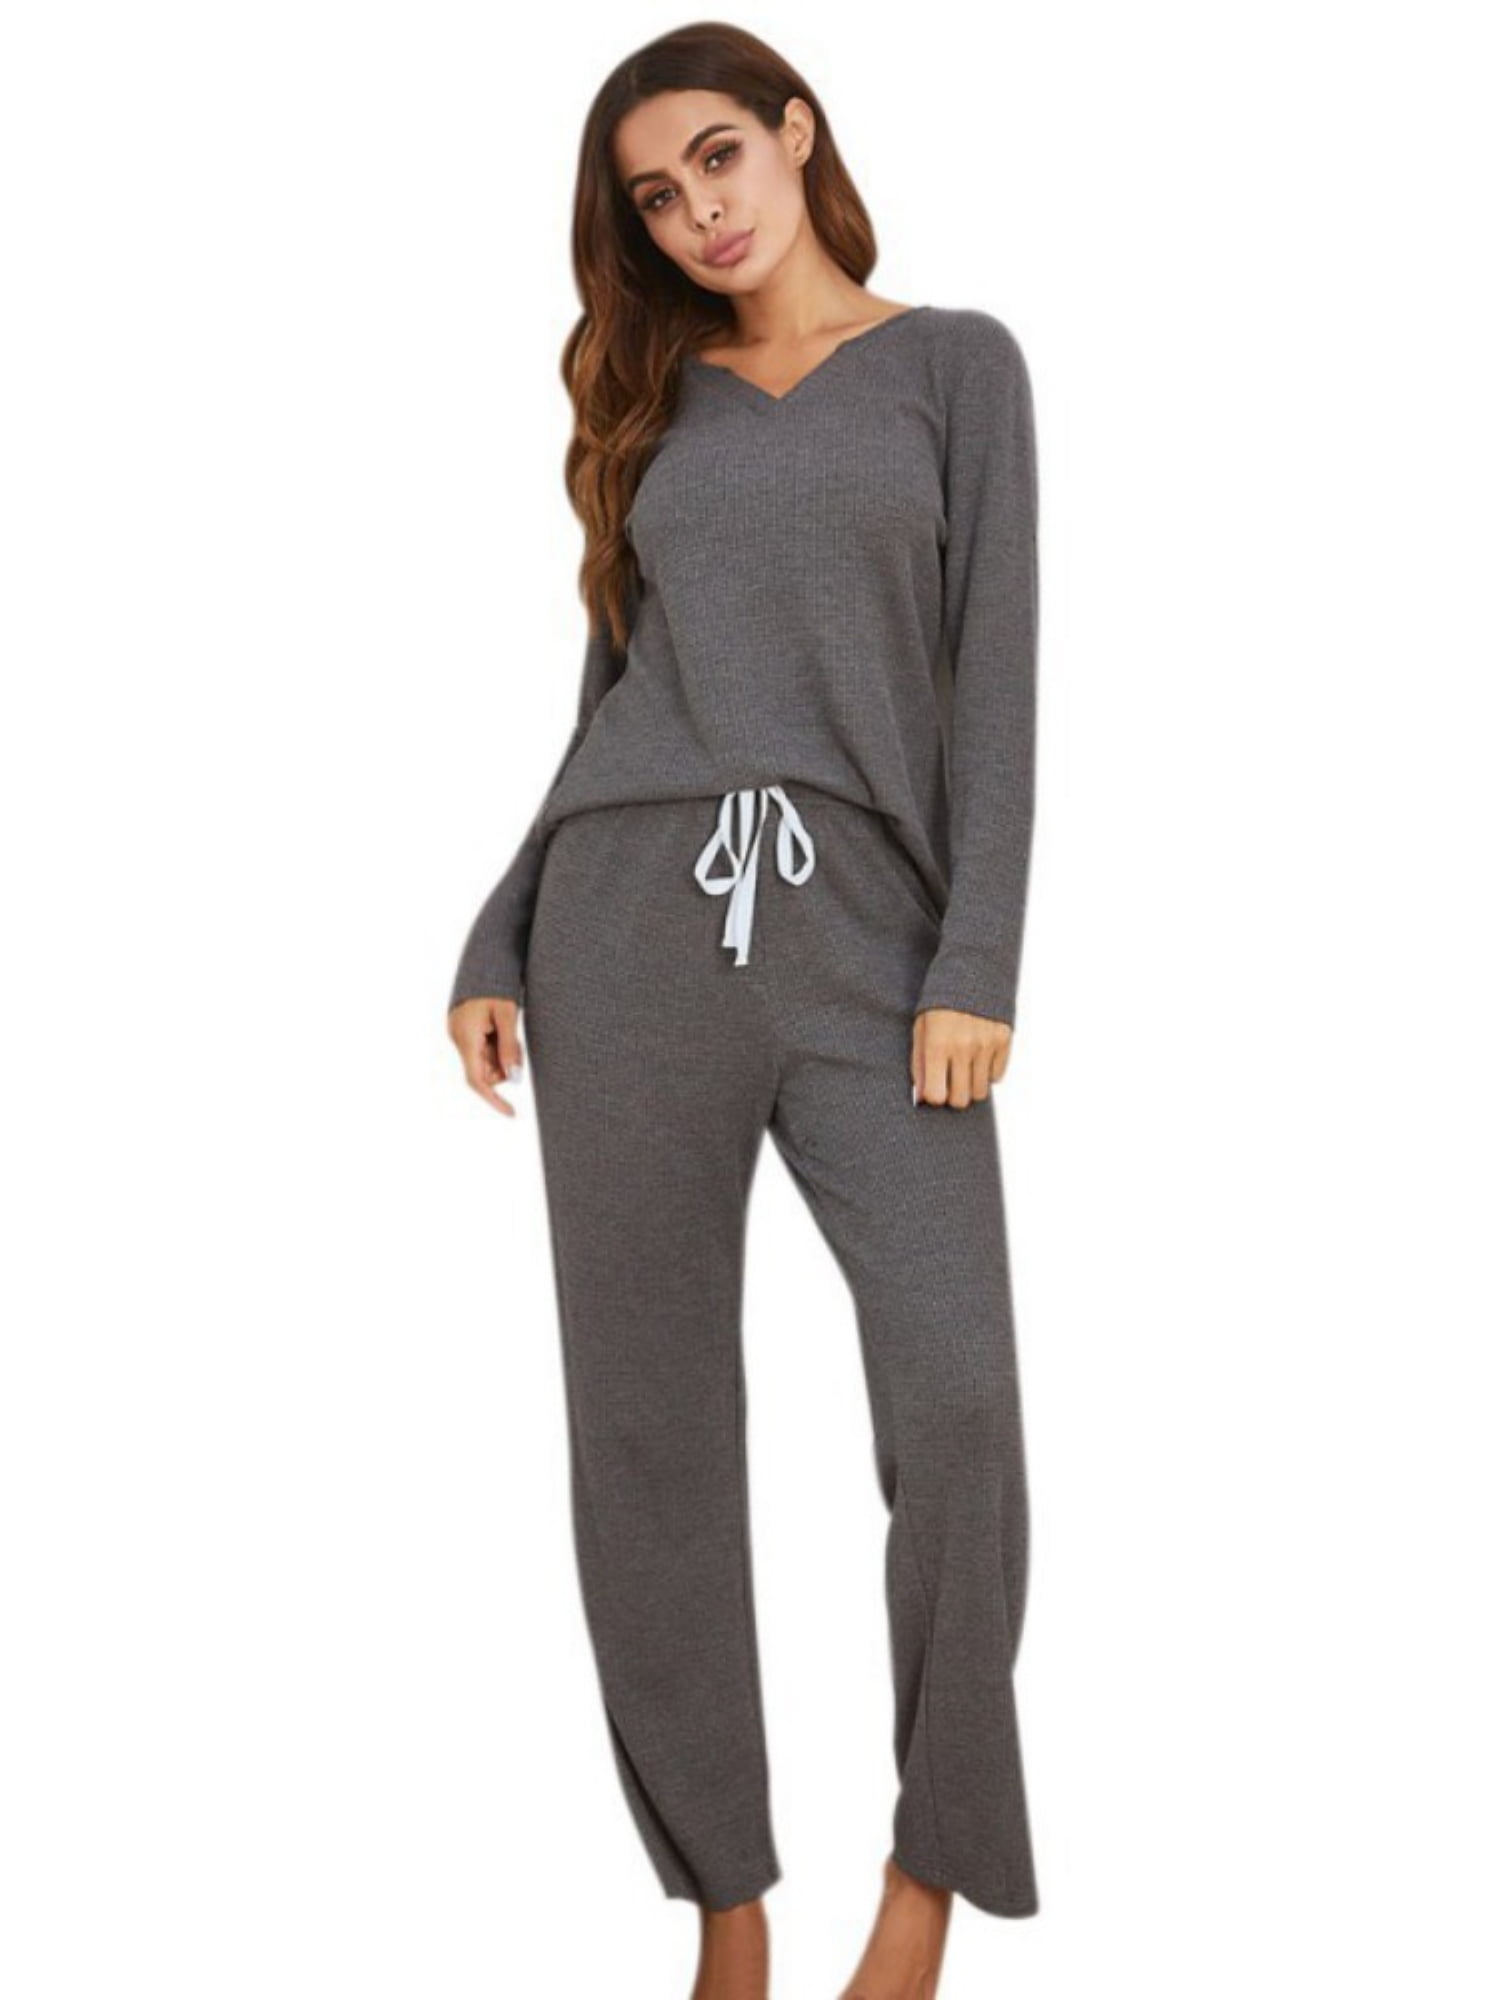 Women Loungewear Sets 2 Piece pj Sets,Long Sleeved V Neck Sweatshirt with  Drawstring Pajamas Sweatpants Sets,Winter Indoor Sleepwear Sweatsuits  Casual Joggers Pullover Outfit Workout Track Sui,Blue 